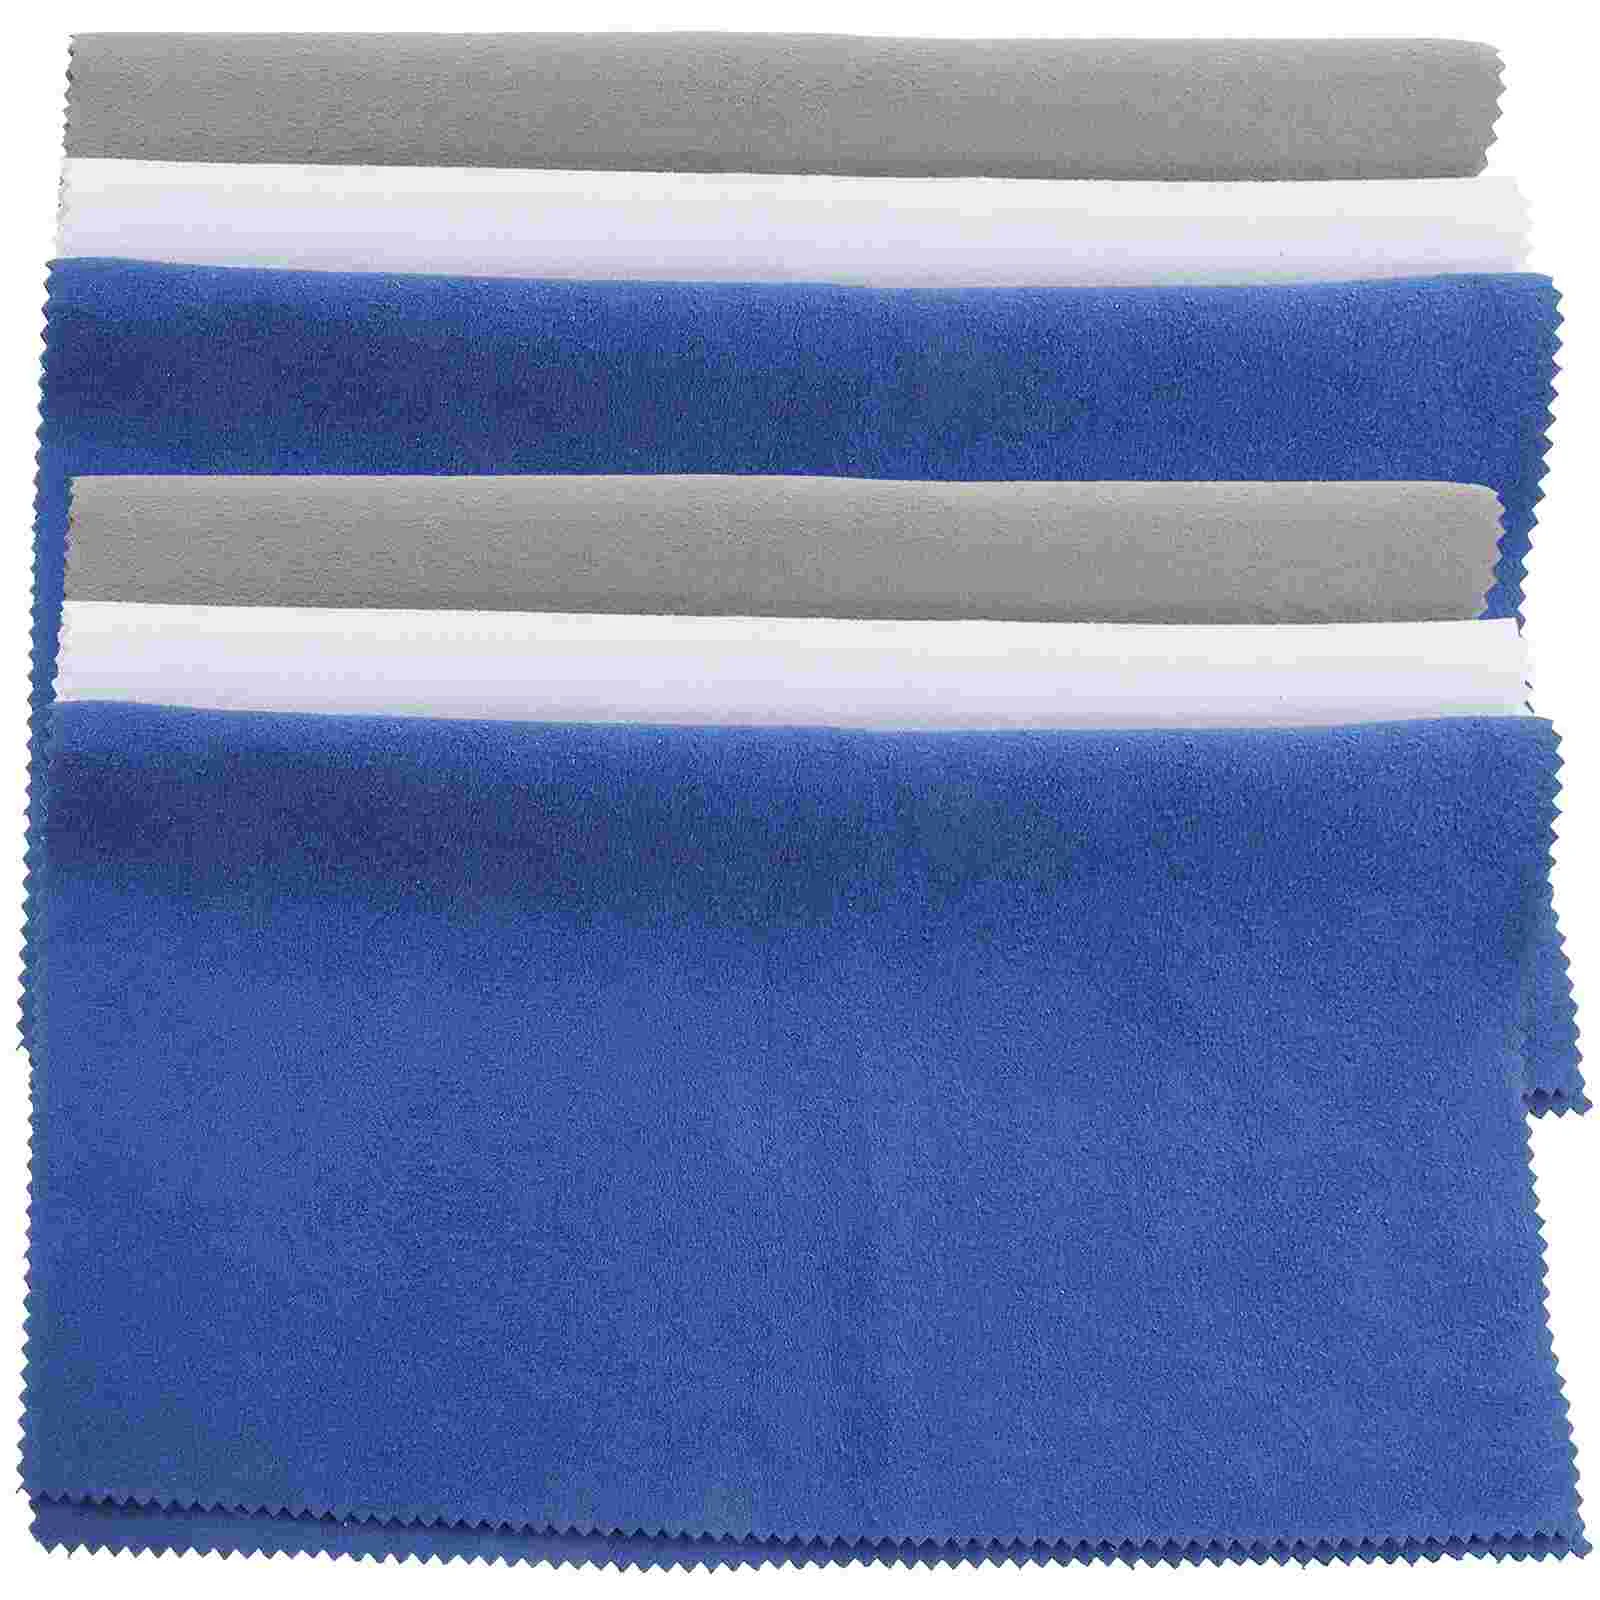 

6 Pcs Violin Cleaning Cloth Clarinet Polishing Cloths for Jewelry Harp Dusting Microfiber Flute Superfine Piano